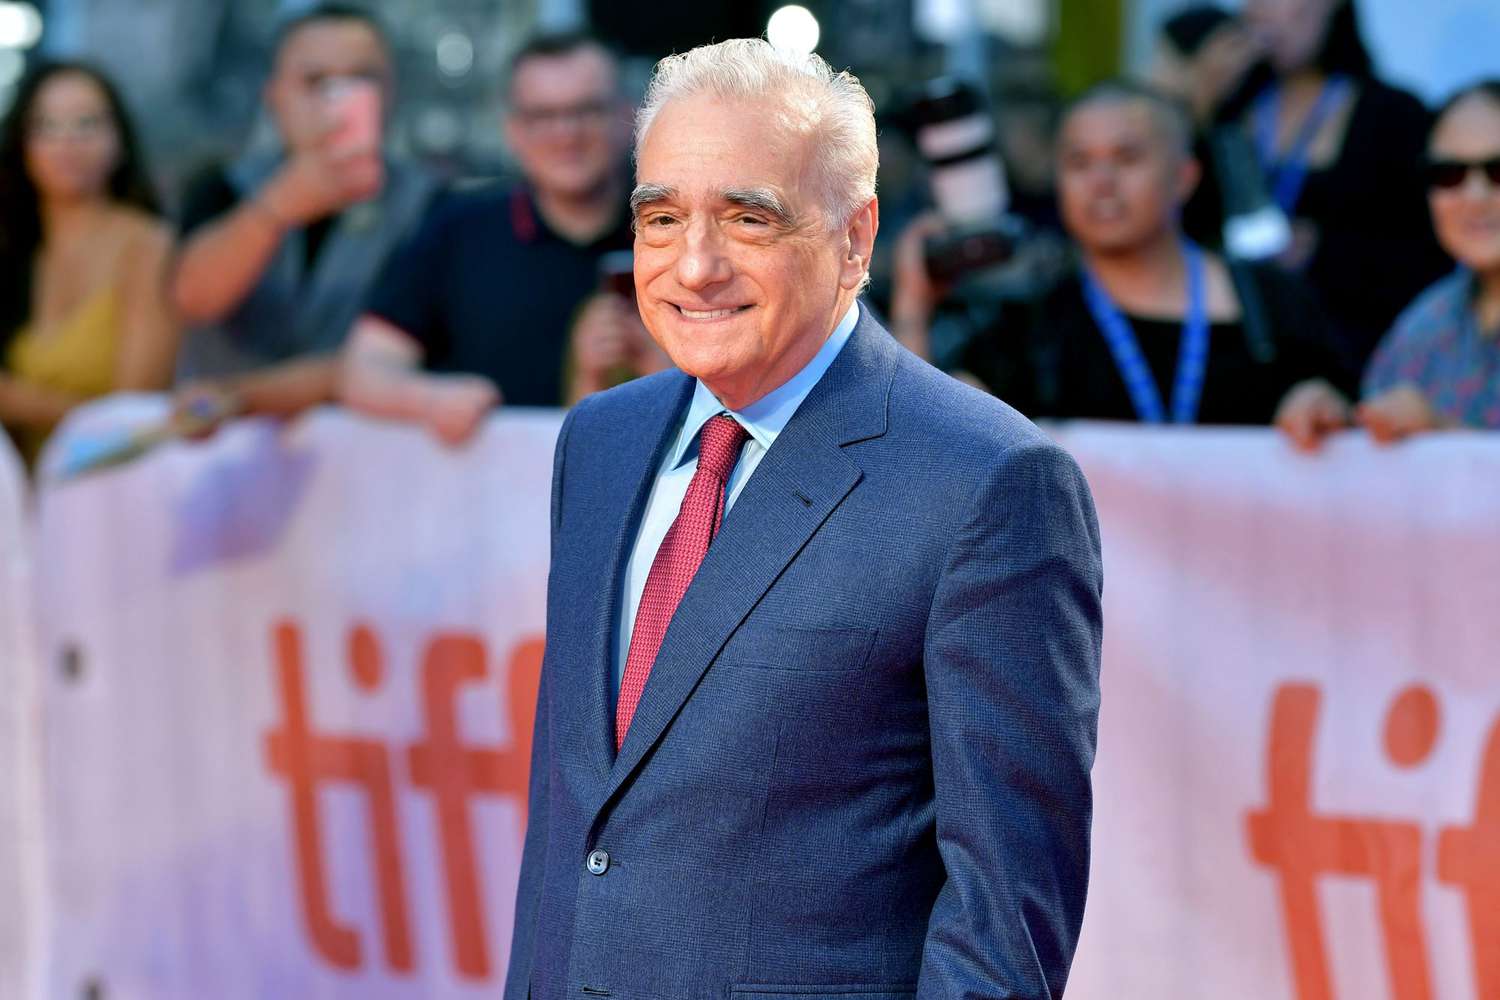 Martin Scorsese wearing a blue suit